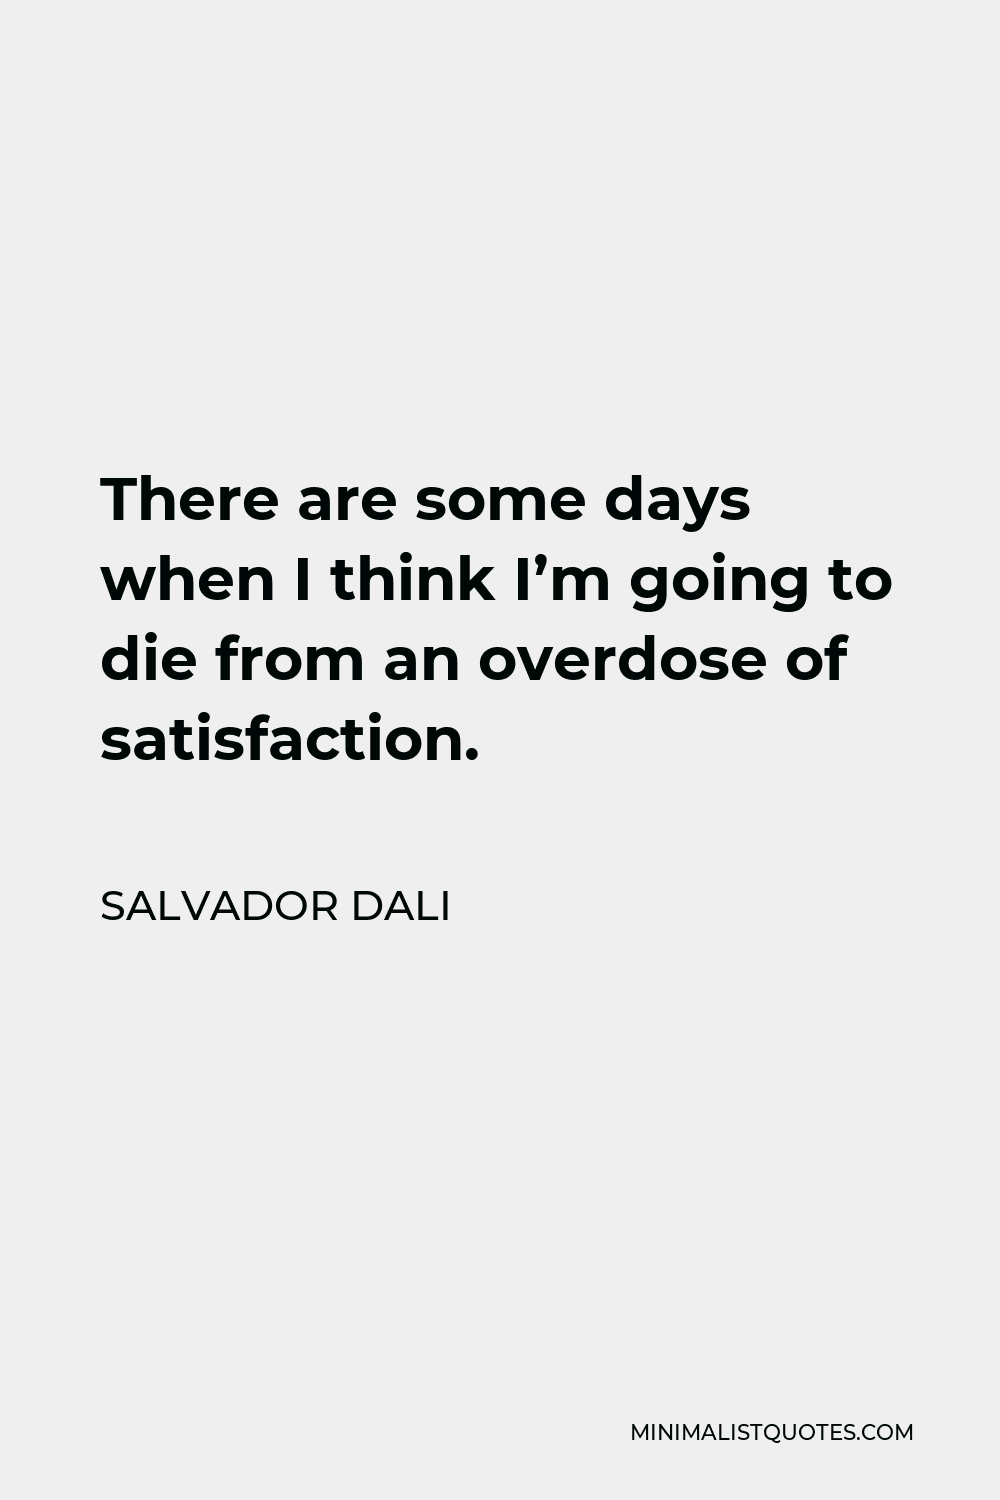 Salvador Dali Quote - There are some days when I think I’m going to die from an overdose of satisfaction.